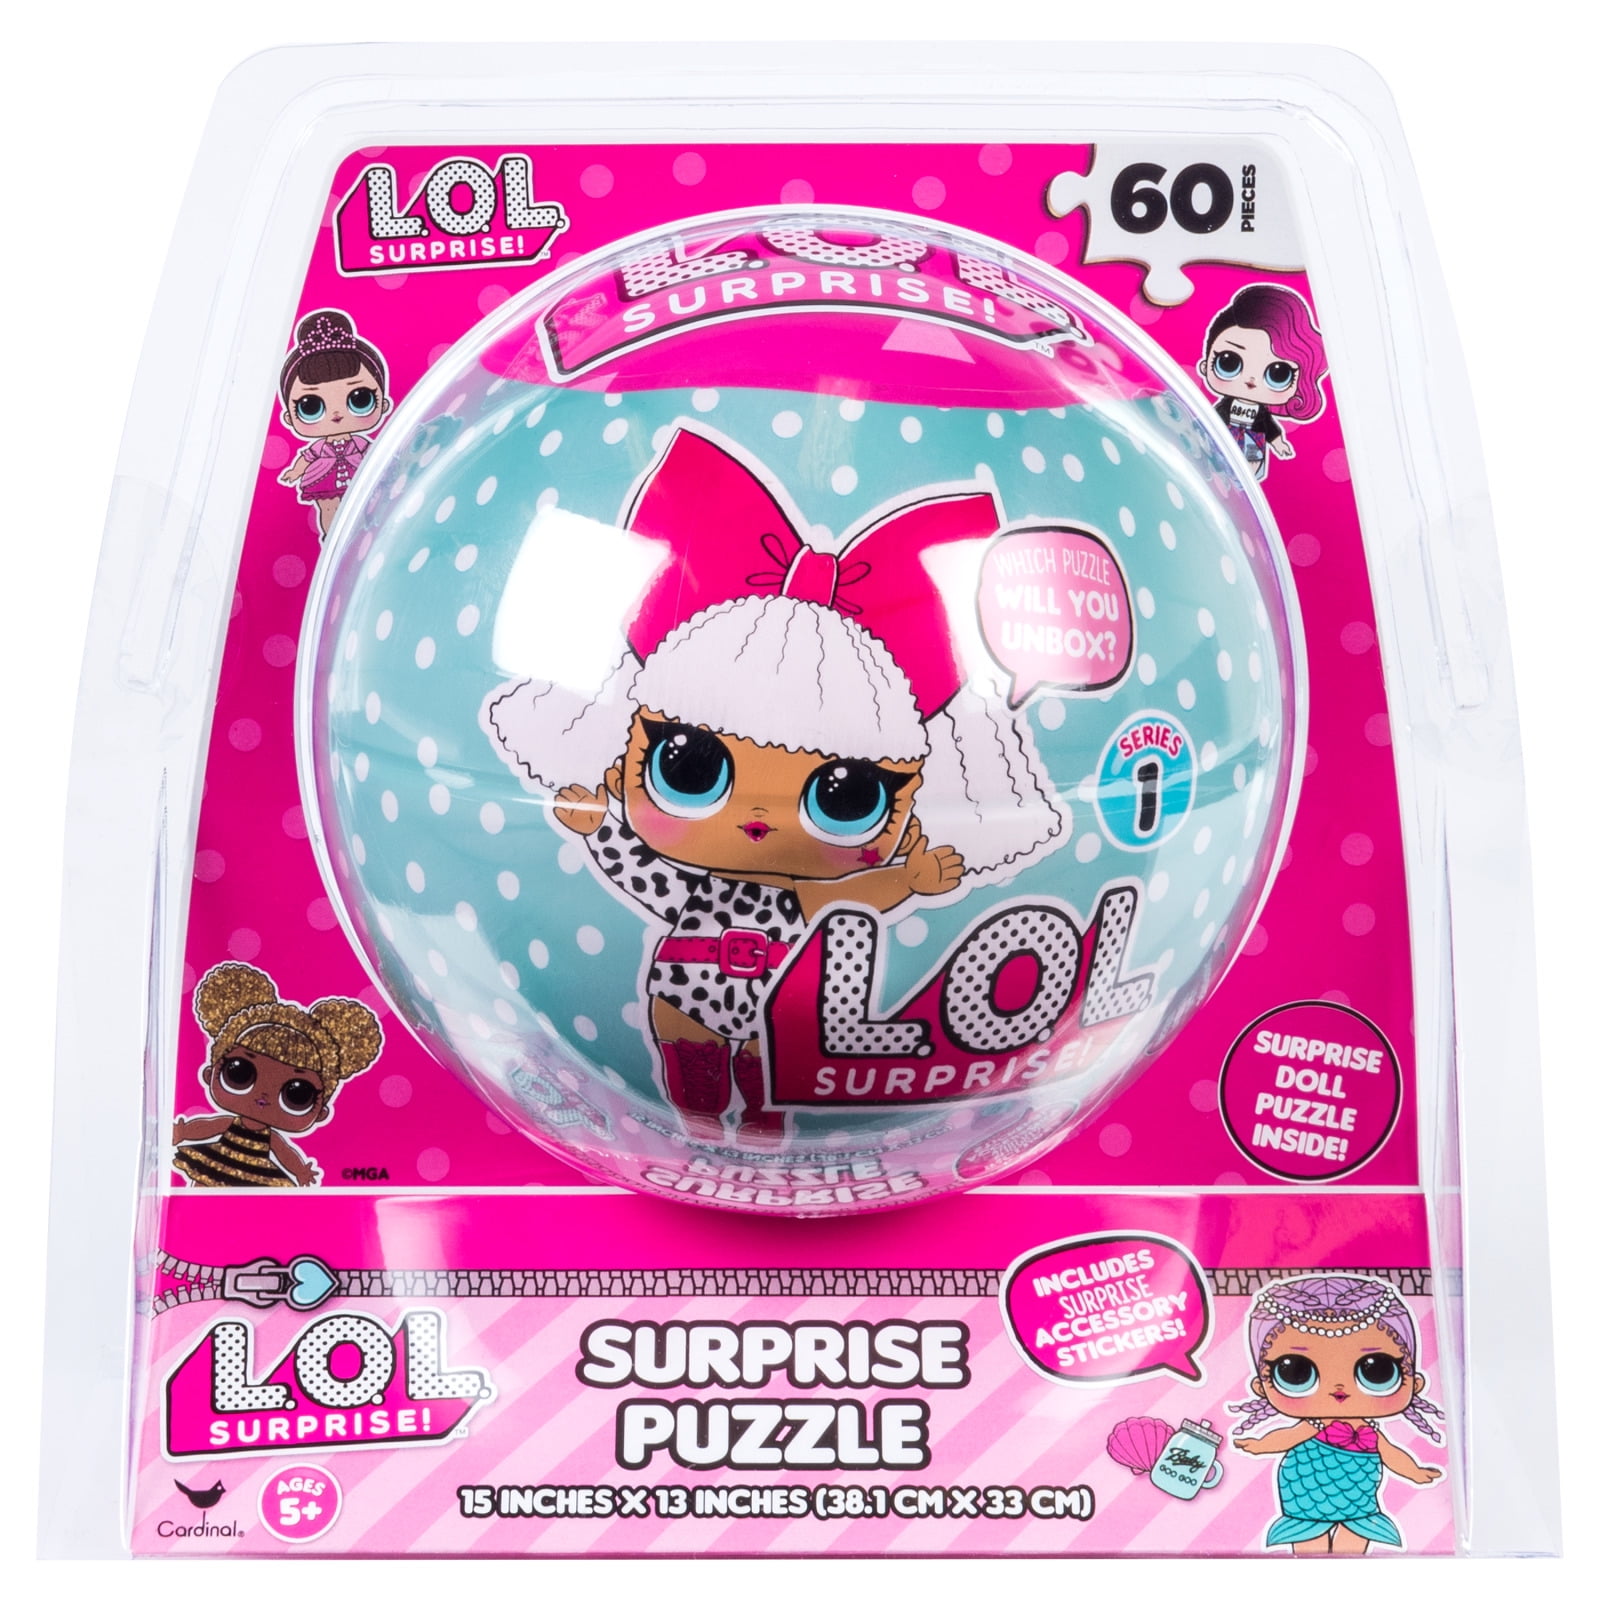 Bundle of LOL Dolls Puzzles Coloring Book and Stickers Jigzaw